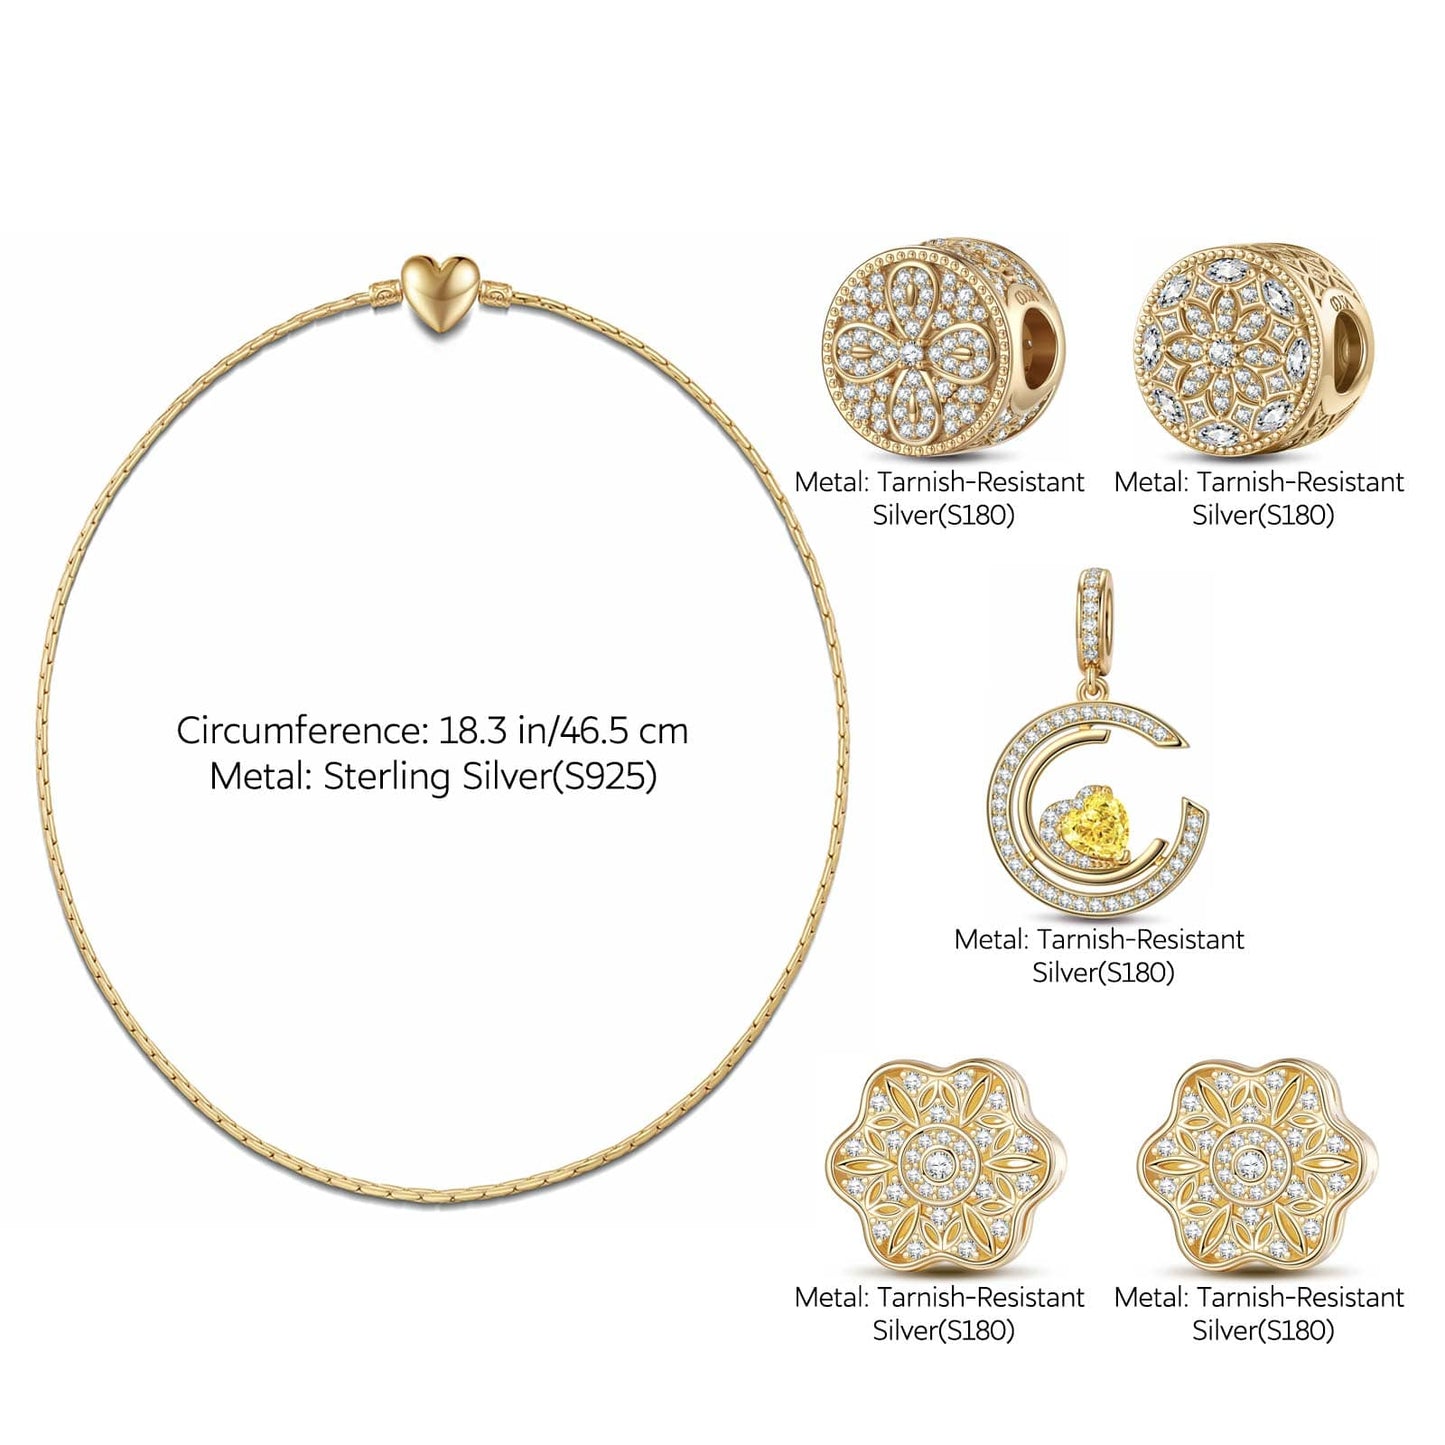 Sterling Silver Moonlit Romance Charms Necklace Set In 14K Gold Plated